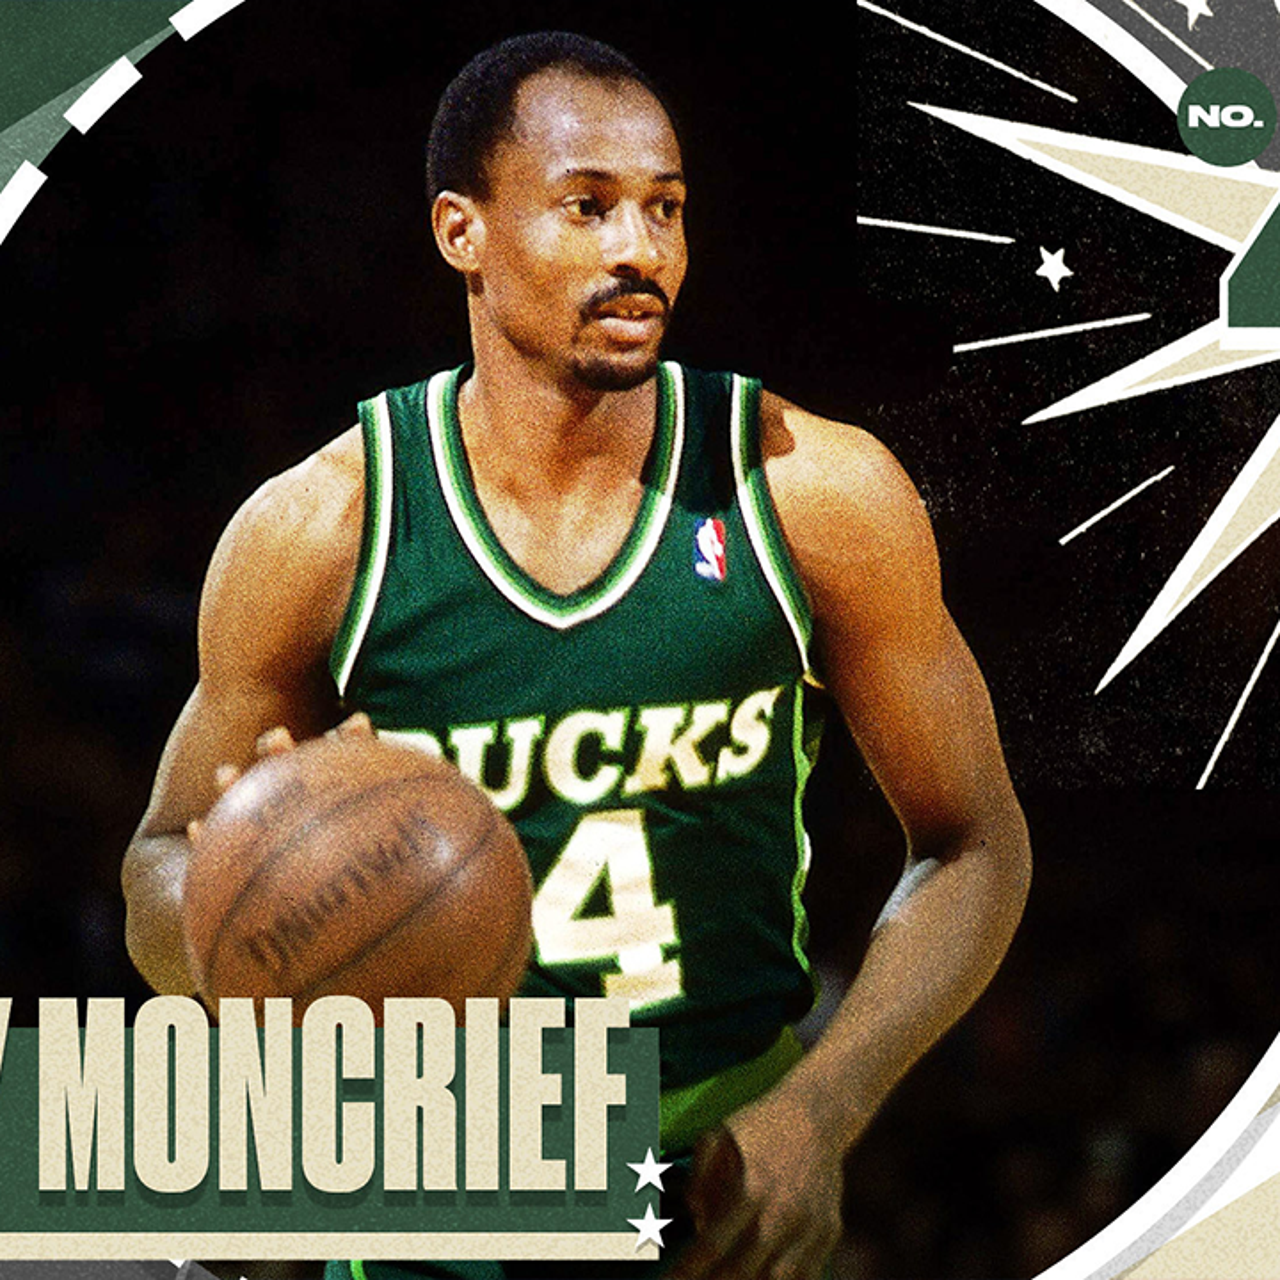 Sidney Moncrief I No. 44 I Nick Wright's Top 50 NBA Players of the